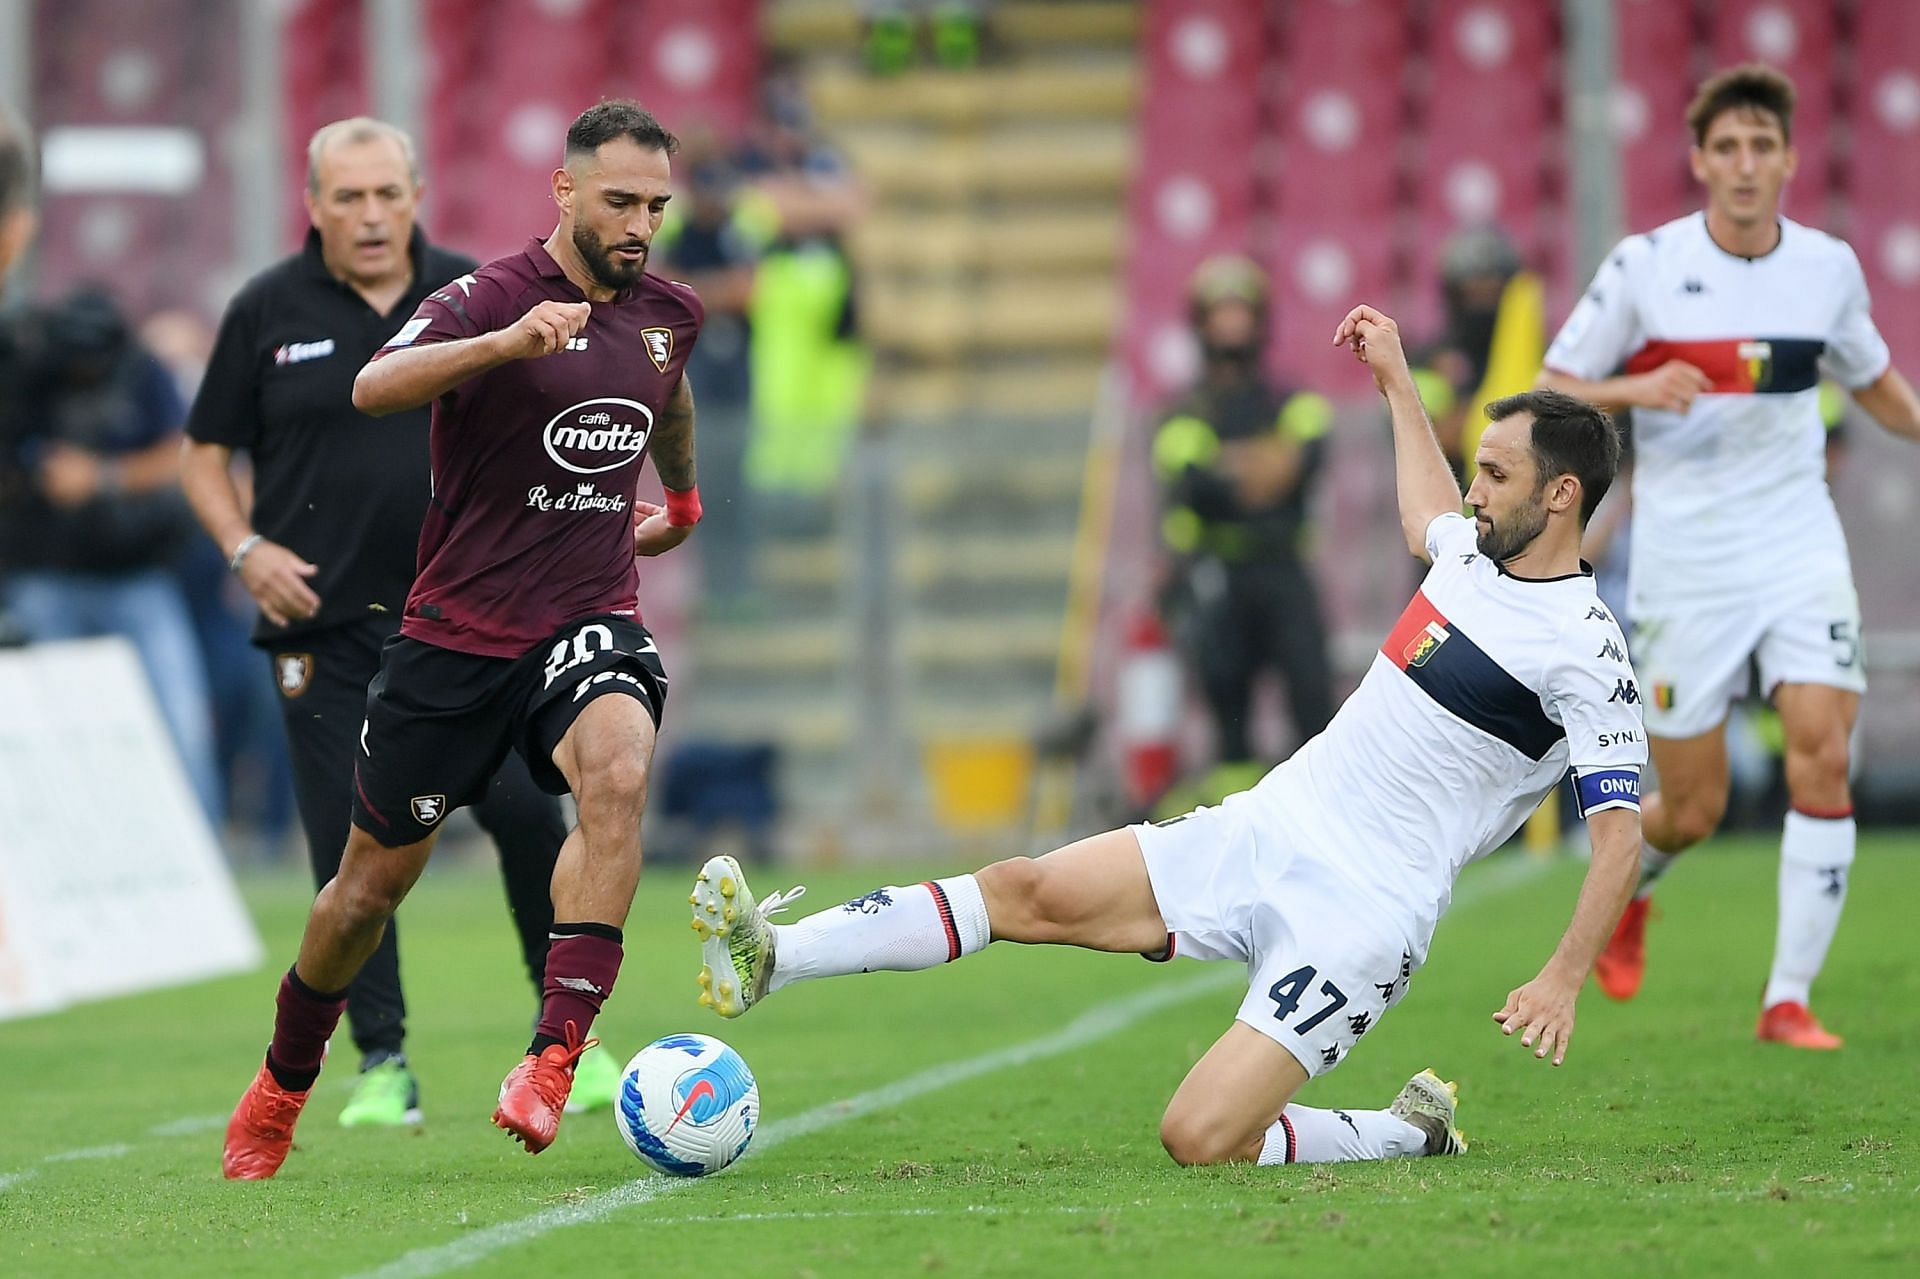 Genoa host Salernitana in their upcoming Serie A fixture on Sunday